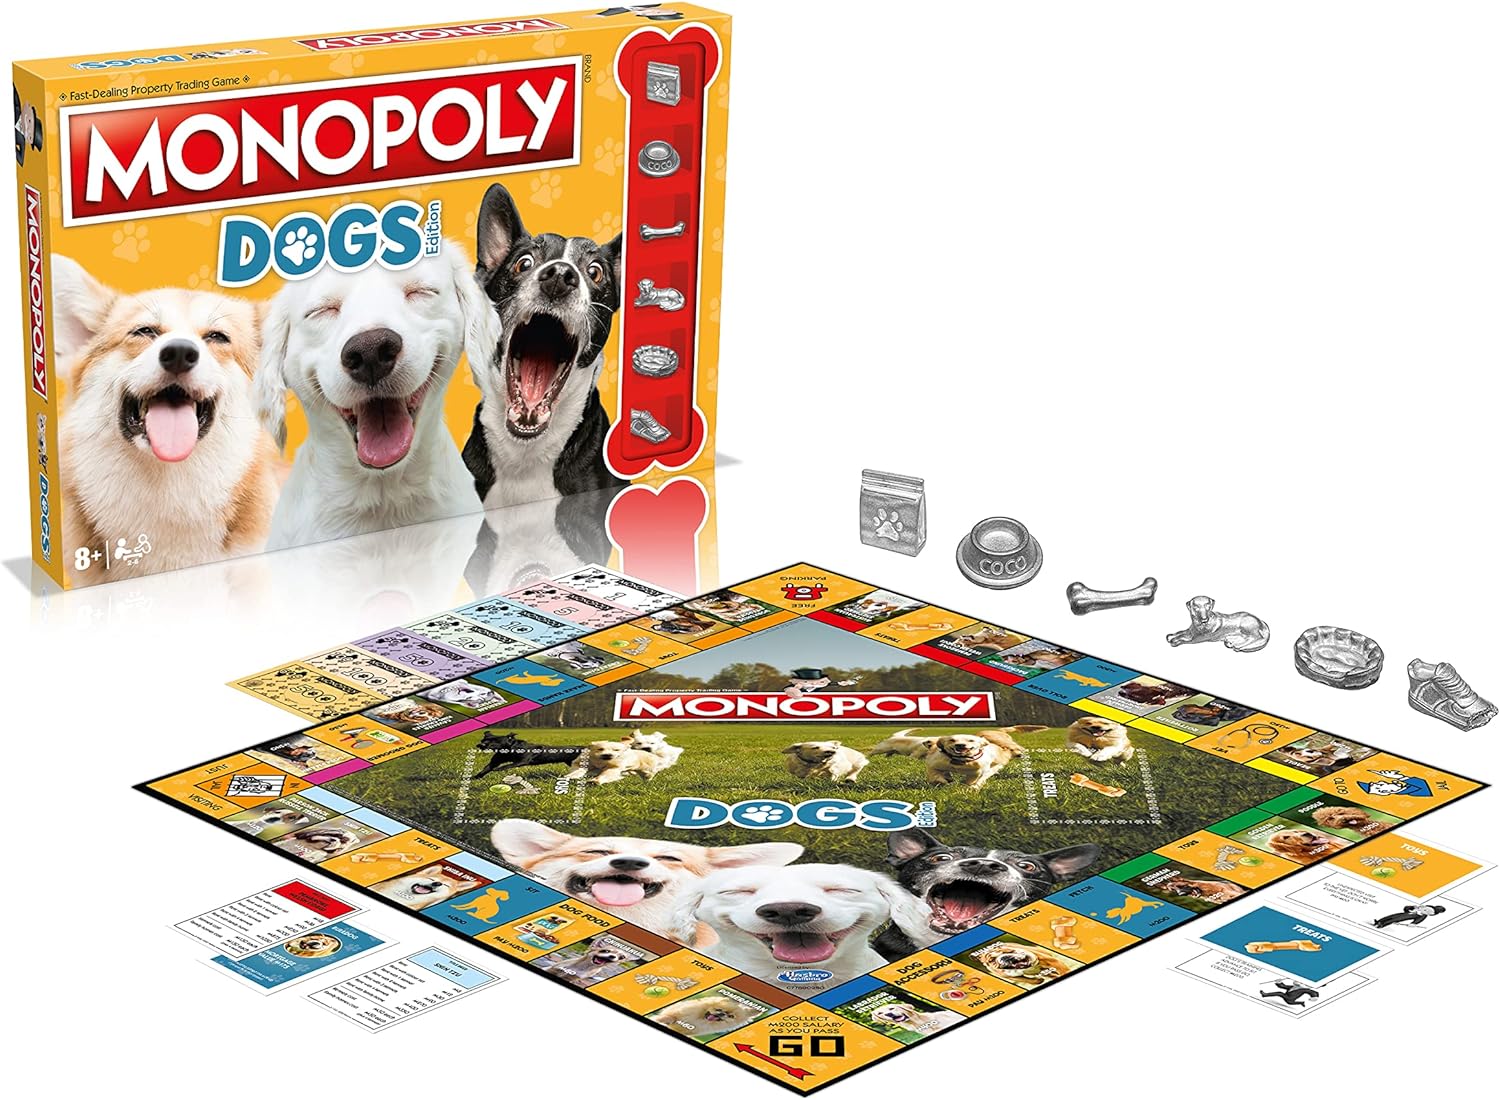 Monopoly - Dogs